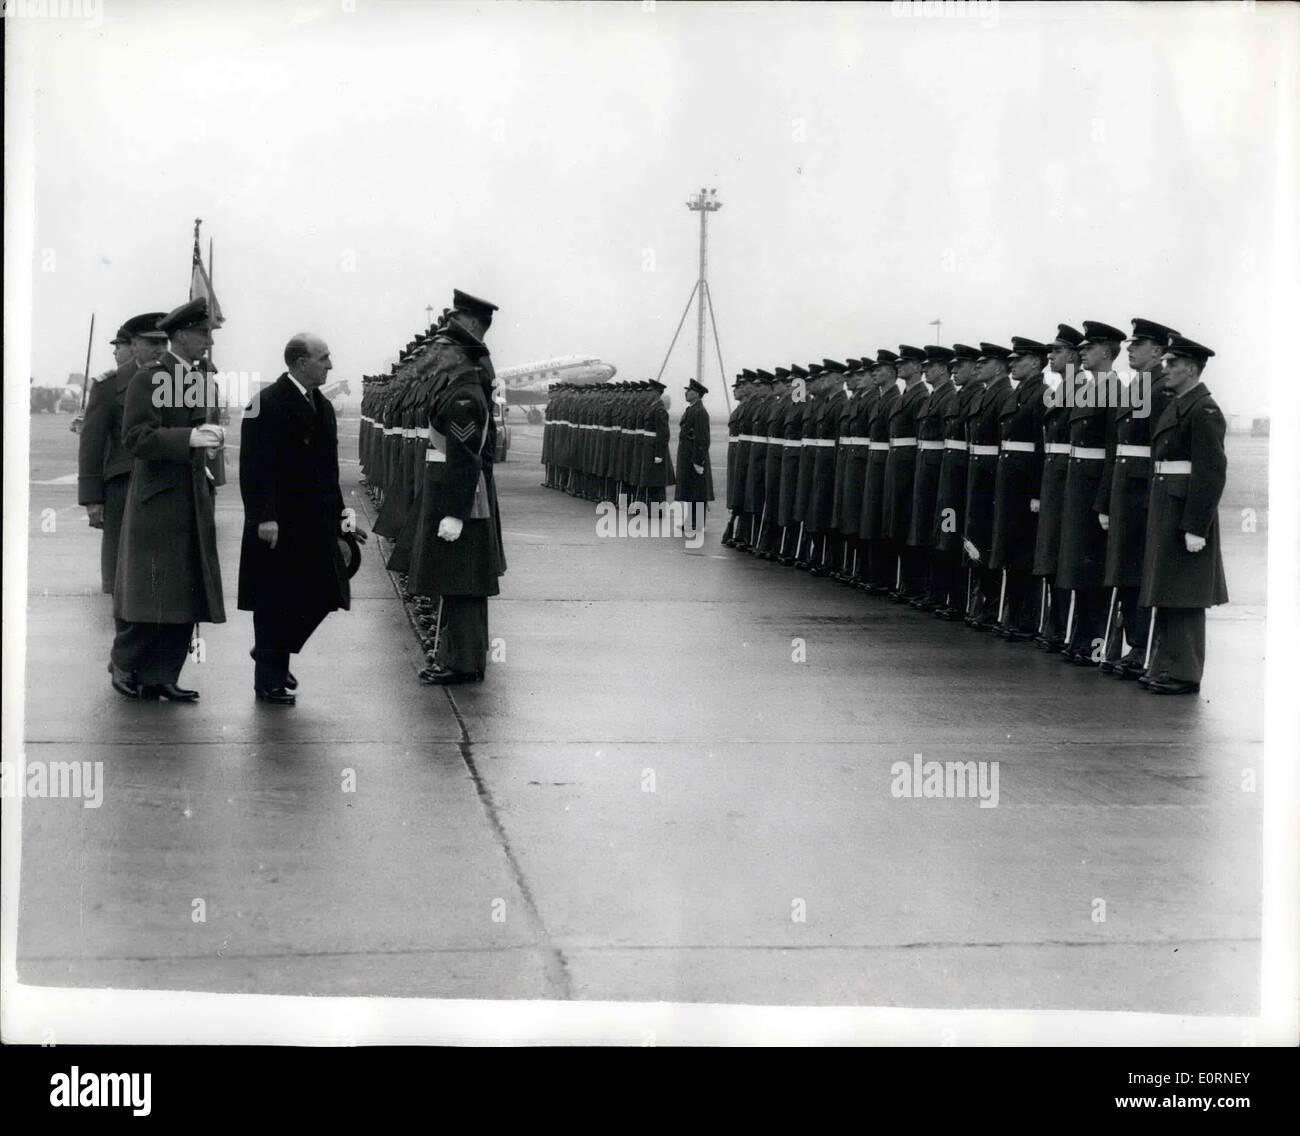 Feb. 02, 1960 - President of Peru Arrrives for Official visit: President Manuel Prado of Peru and his wife arrived at London Airport this morning at start of their official visit. Mme. Clorinda Prado is said to be one of the smartest dressed women in Latin America. Photo shows President Prado inspects the Guard of Honour at London Airport this morning. Stock Photo